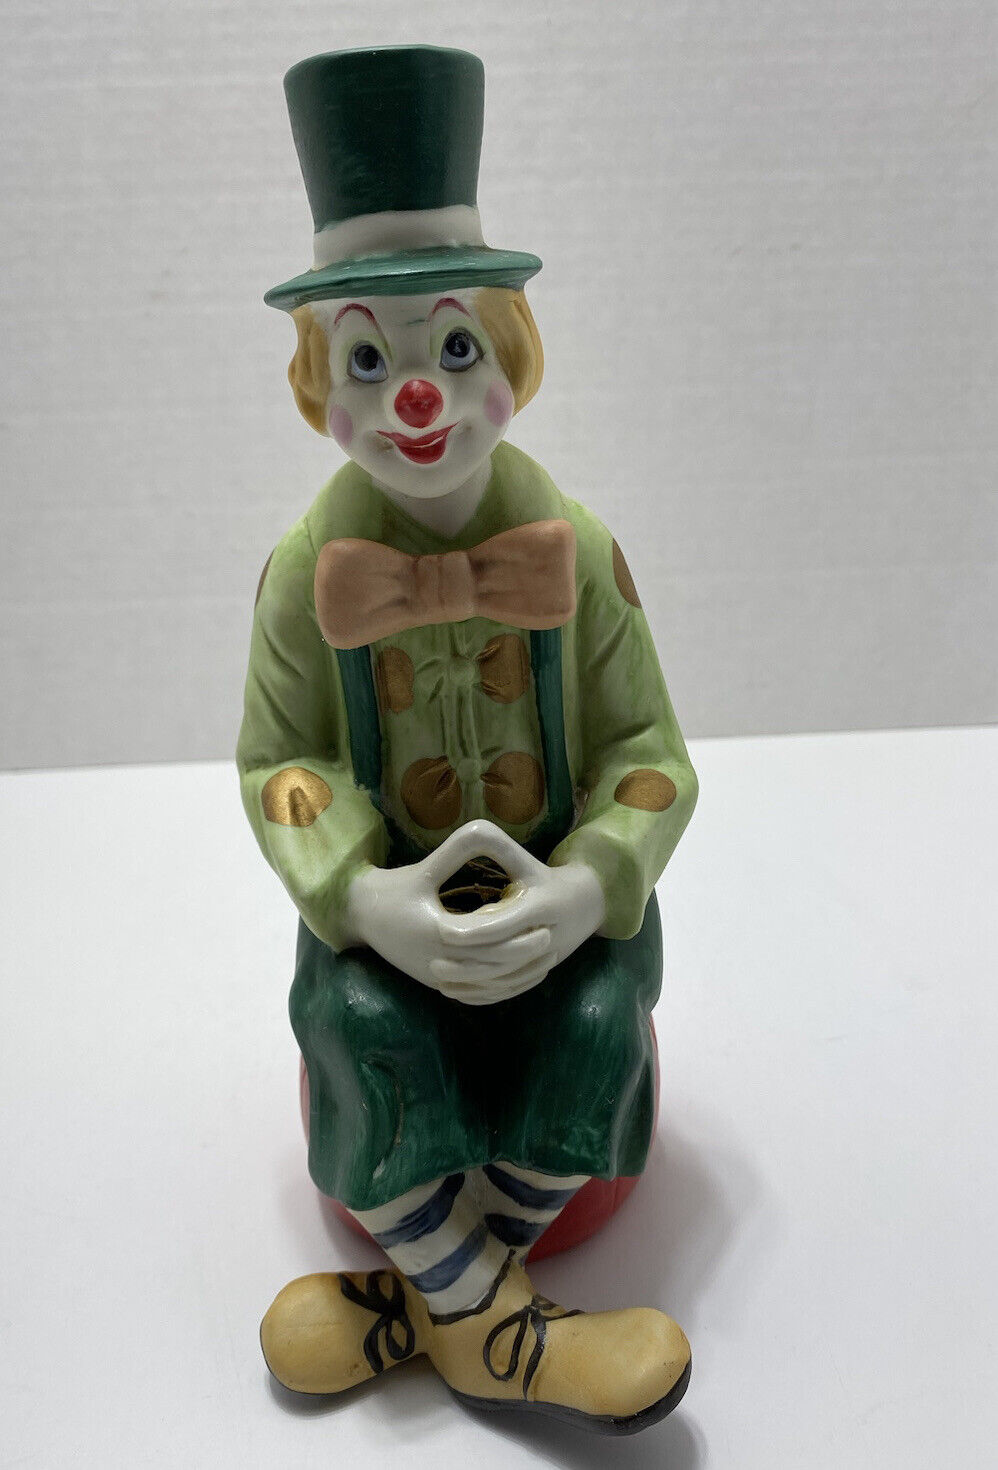 Enesco Vintage 1981Collection Porcelain Clown Red Ball Circus Statue Figurine 8”